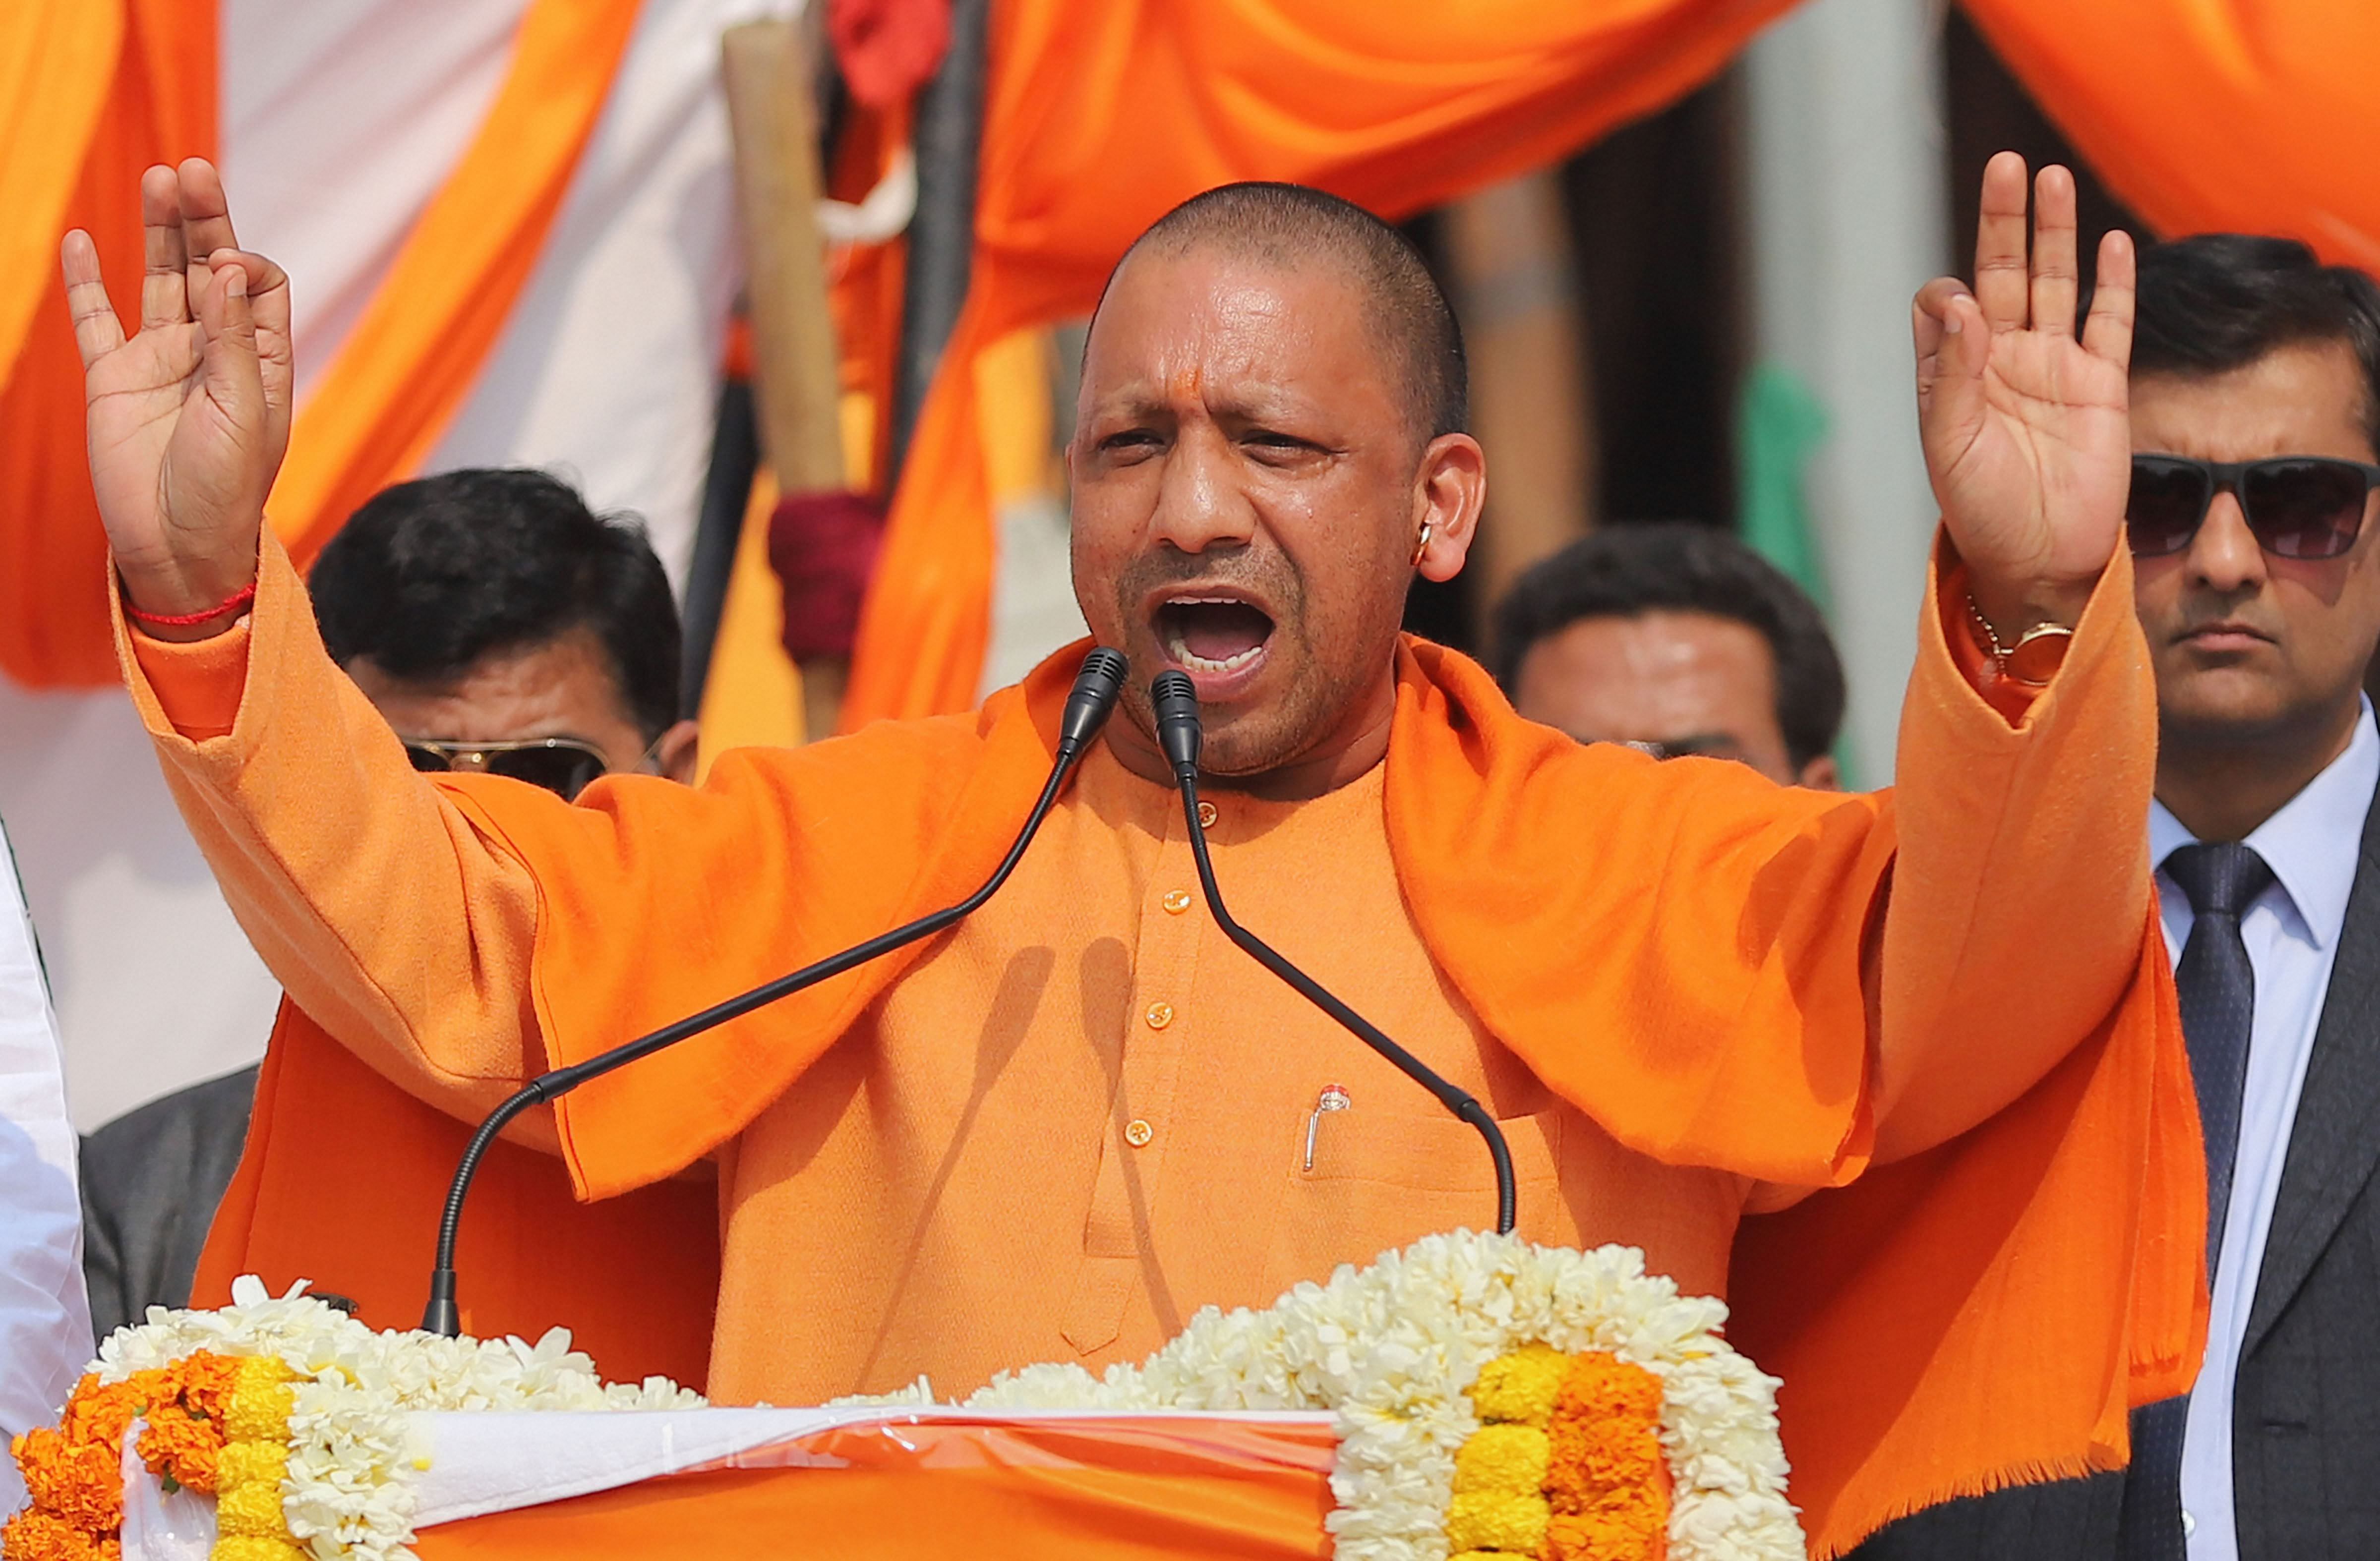 On Tuesday, All India Congress Committee (AICC) office-bearer P L Punia said Adityanath’s “misleading statement” could lead to “social hatred”. (Credit: PTI Photo)